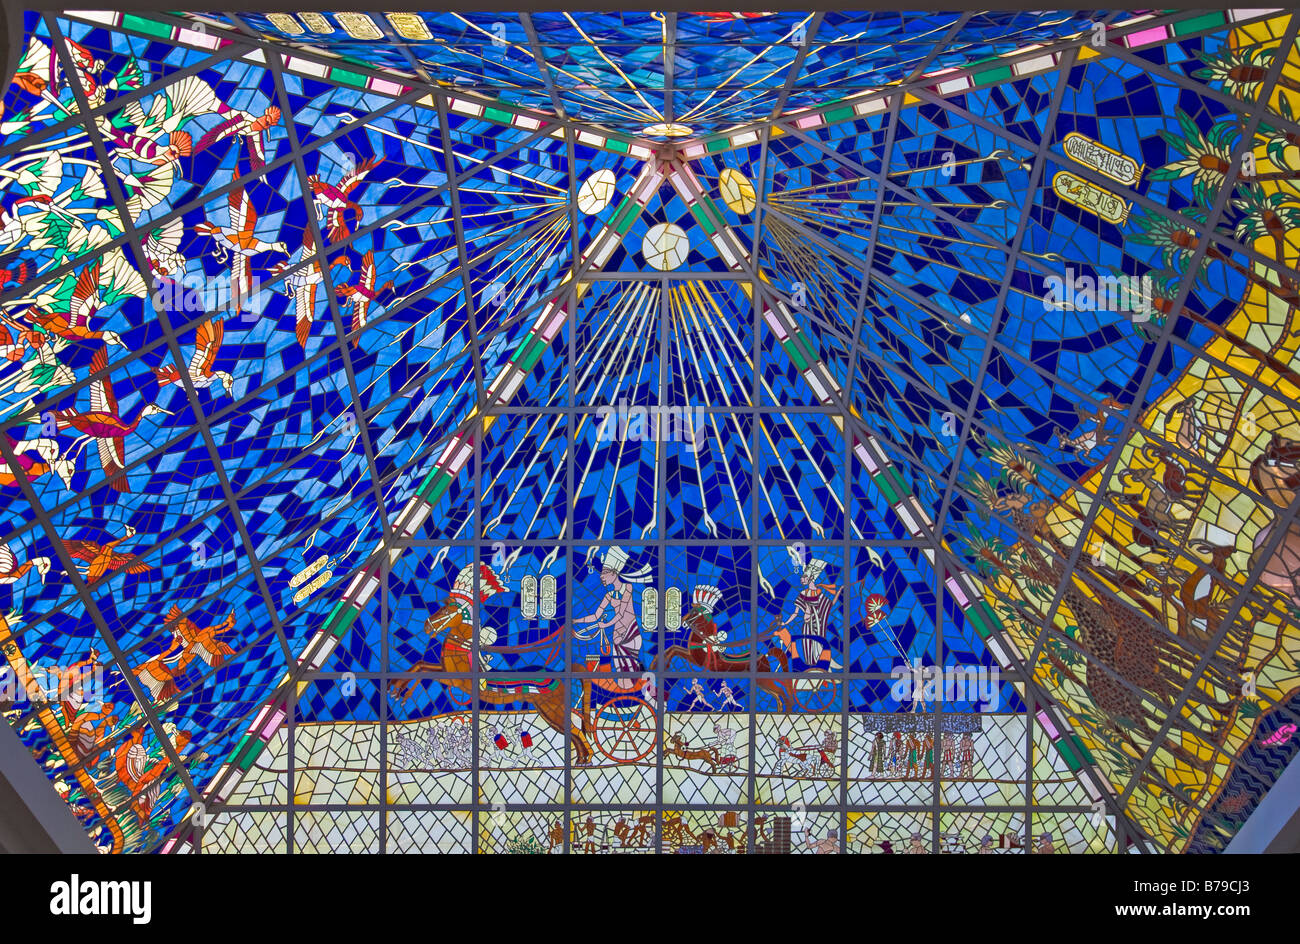 Spectacular stained glass ceiling- Wafi City Shopping Mall Dubai Stock Photo